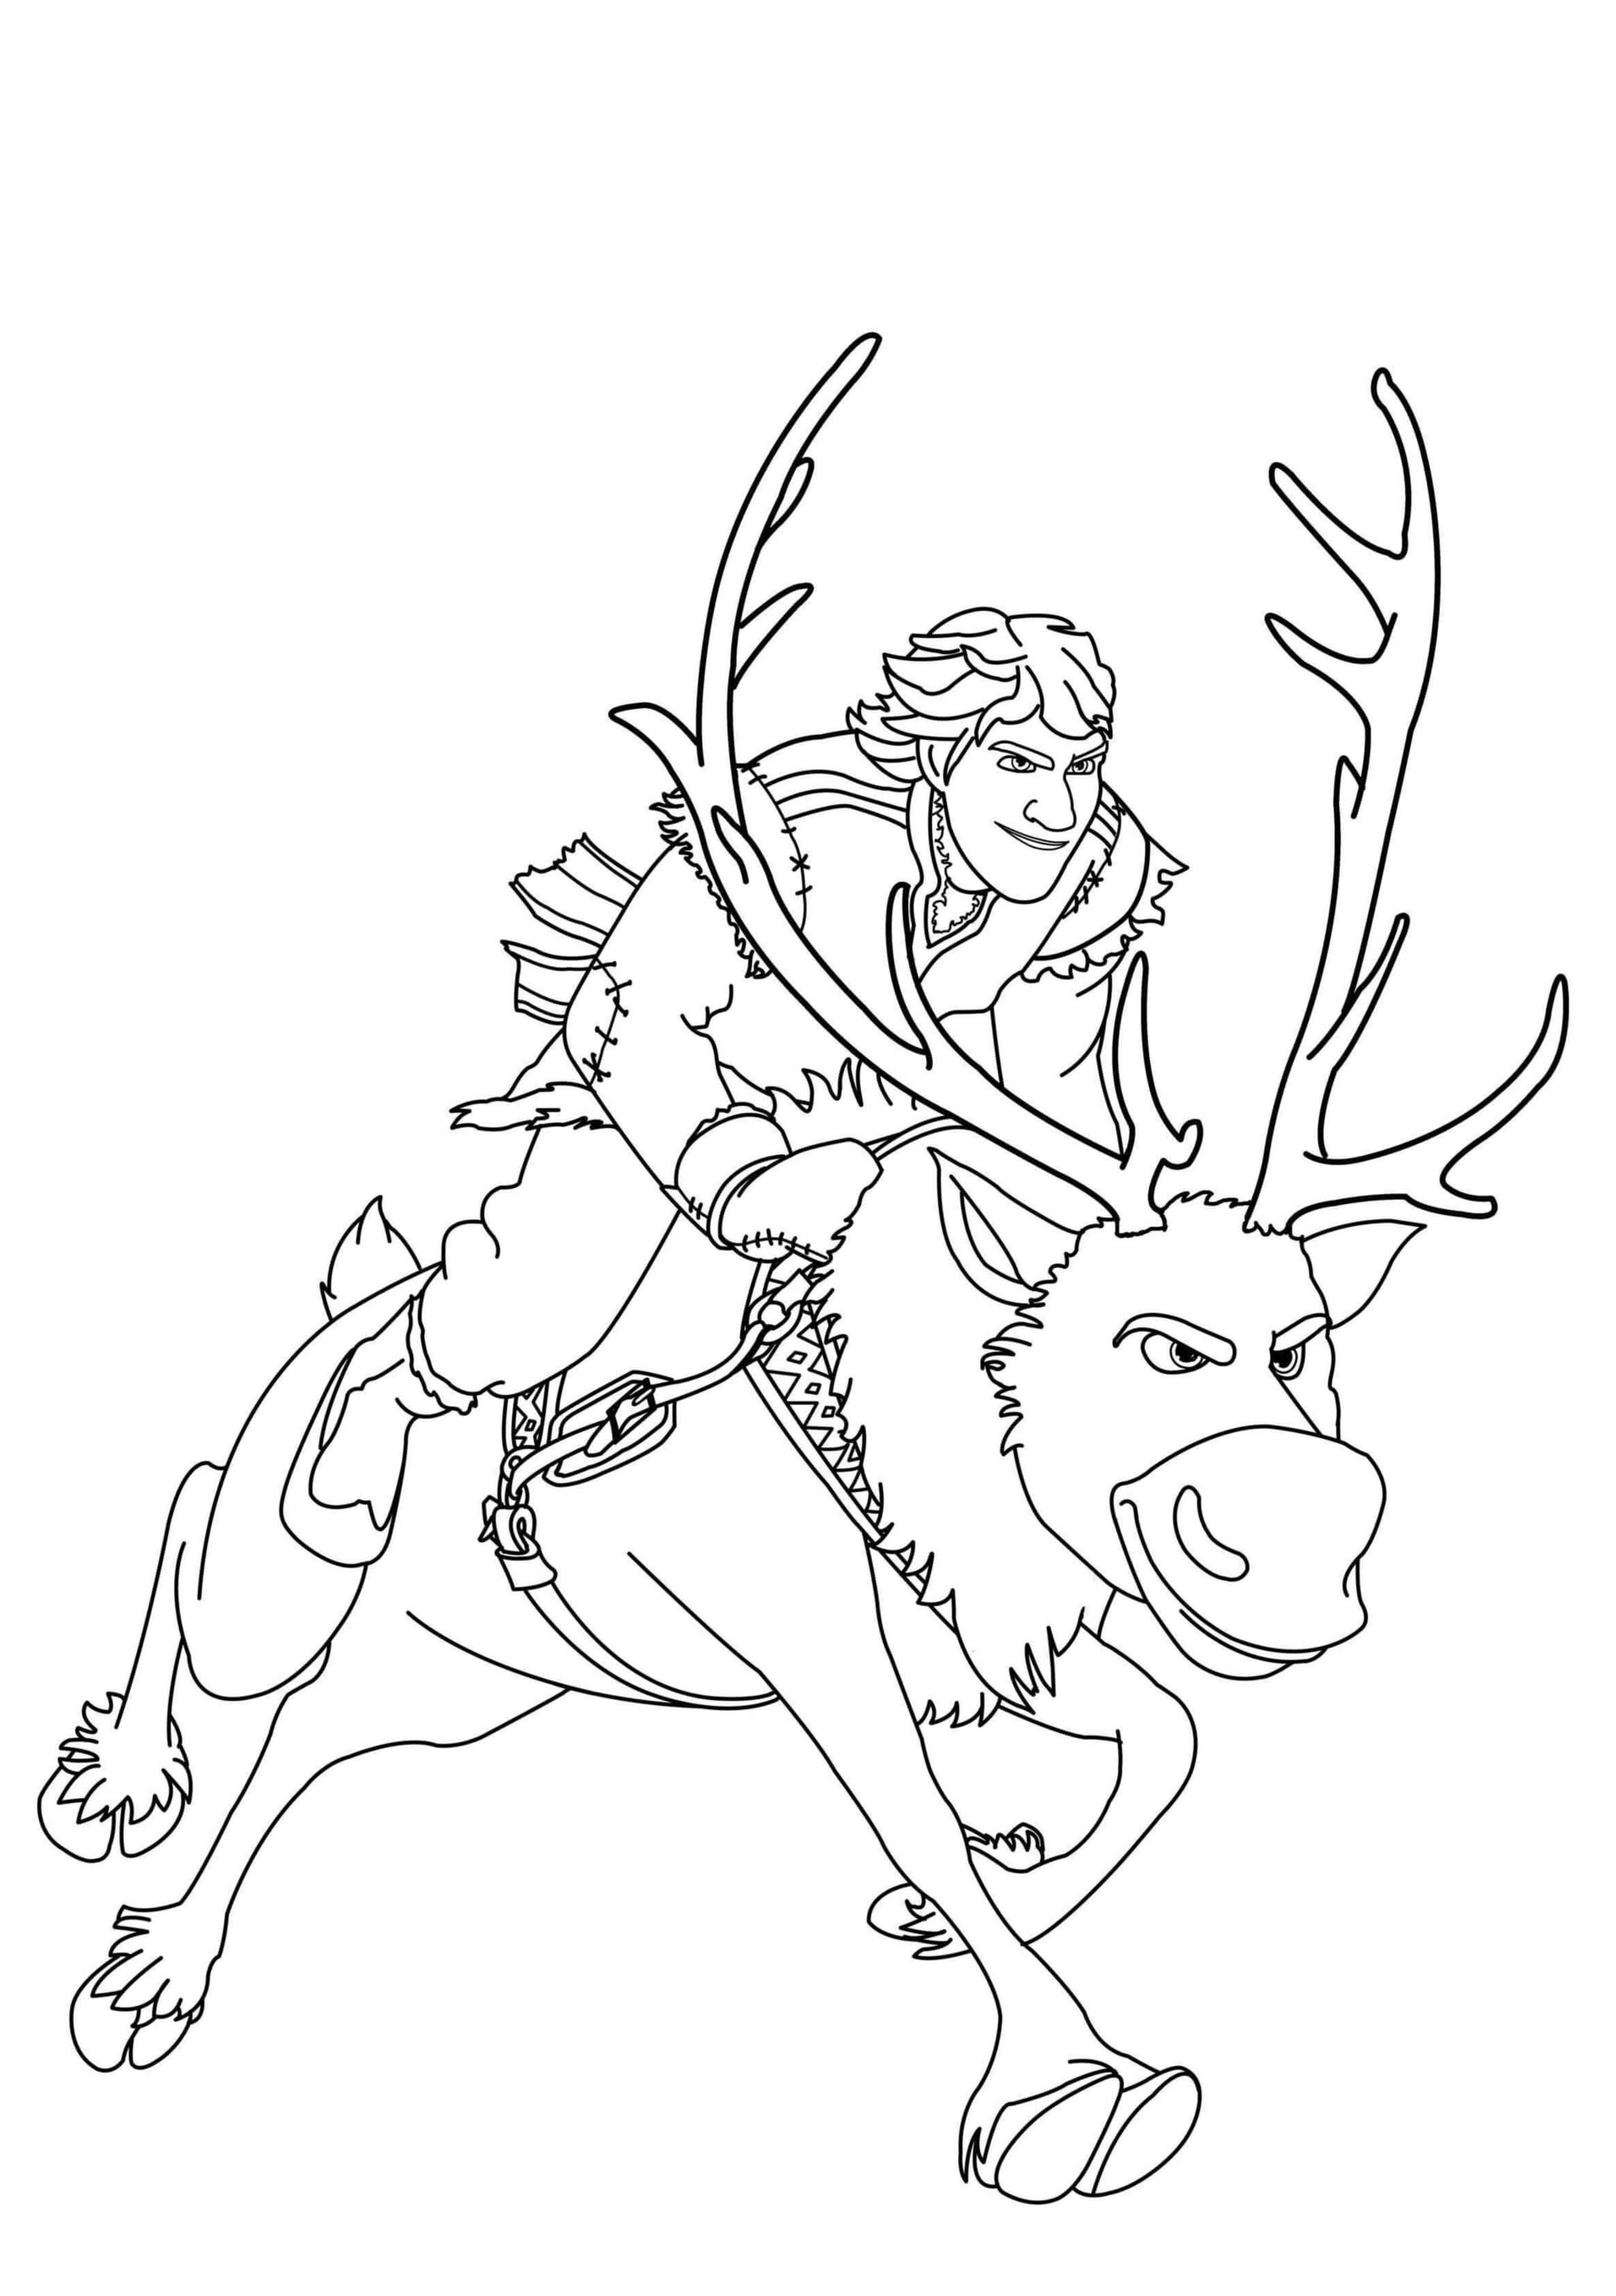 Kristoff True Outdoorsman With His Best Friend Sven Coloring Page